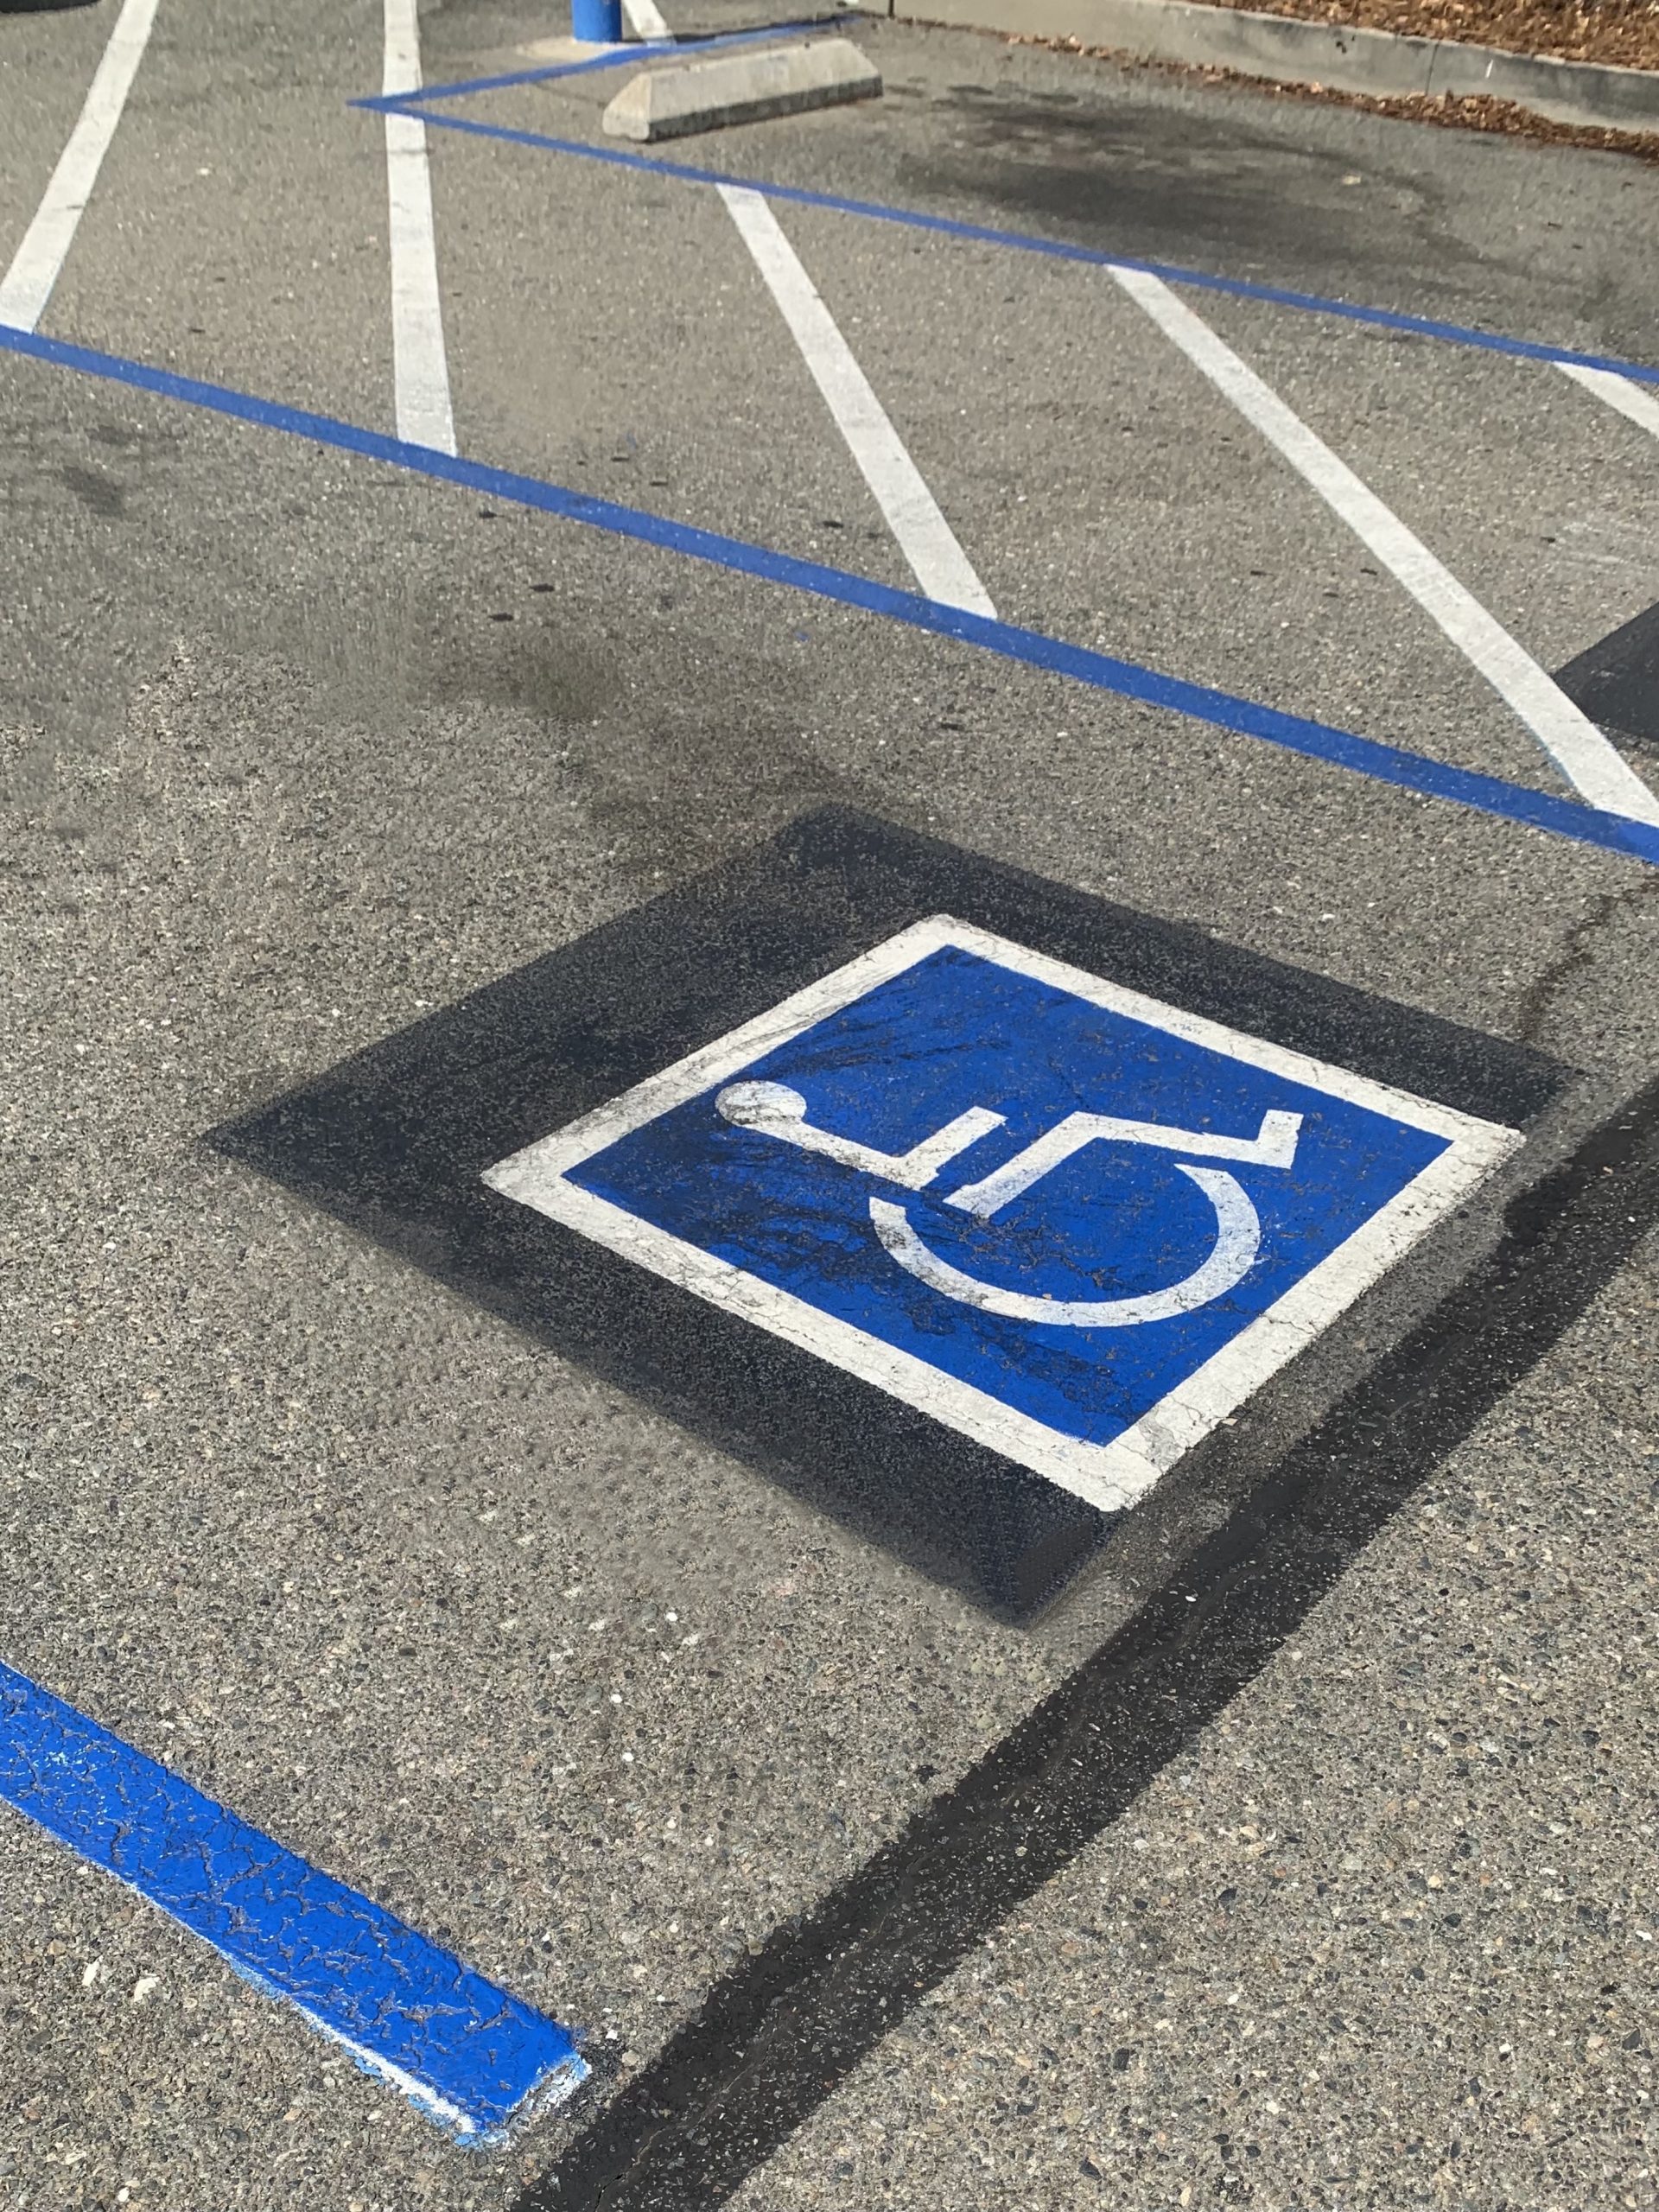 Improve the infrastructure needed to support those with disabilities